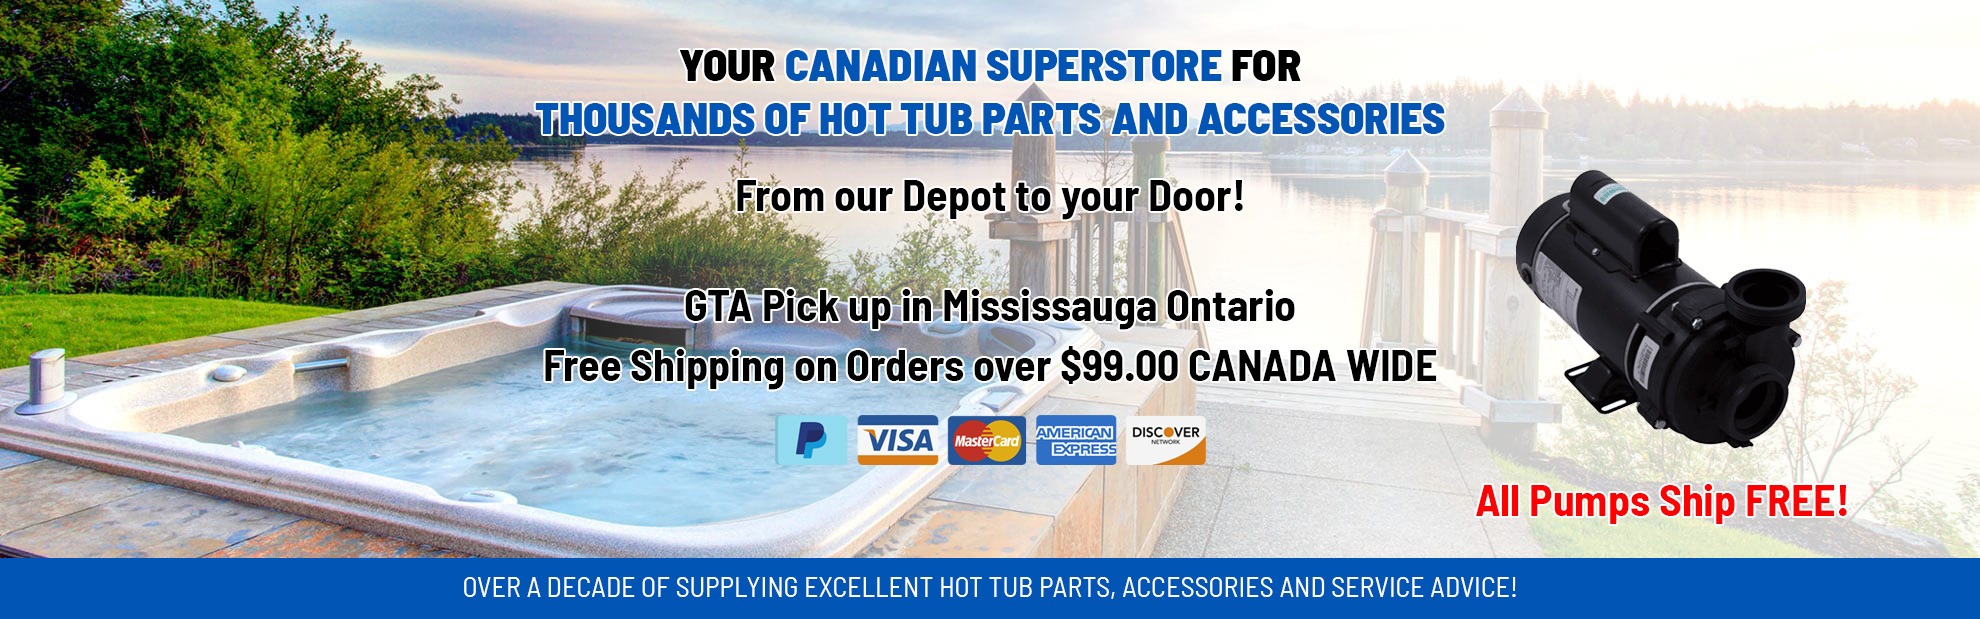 The Hot Tub Superstore, USA, Canada